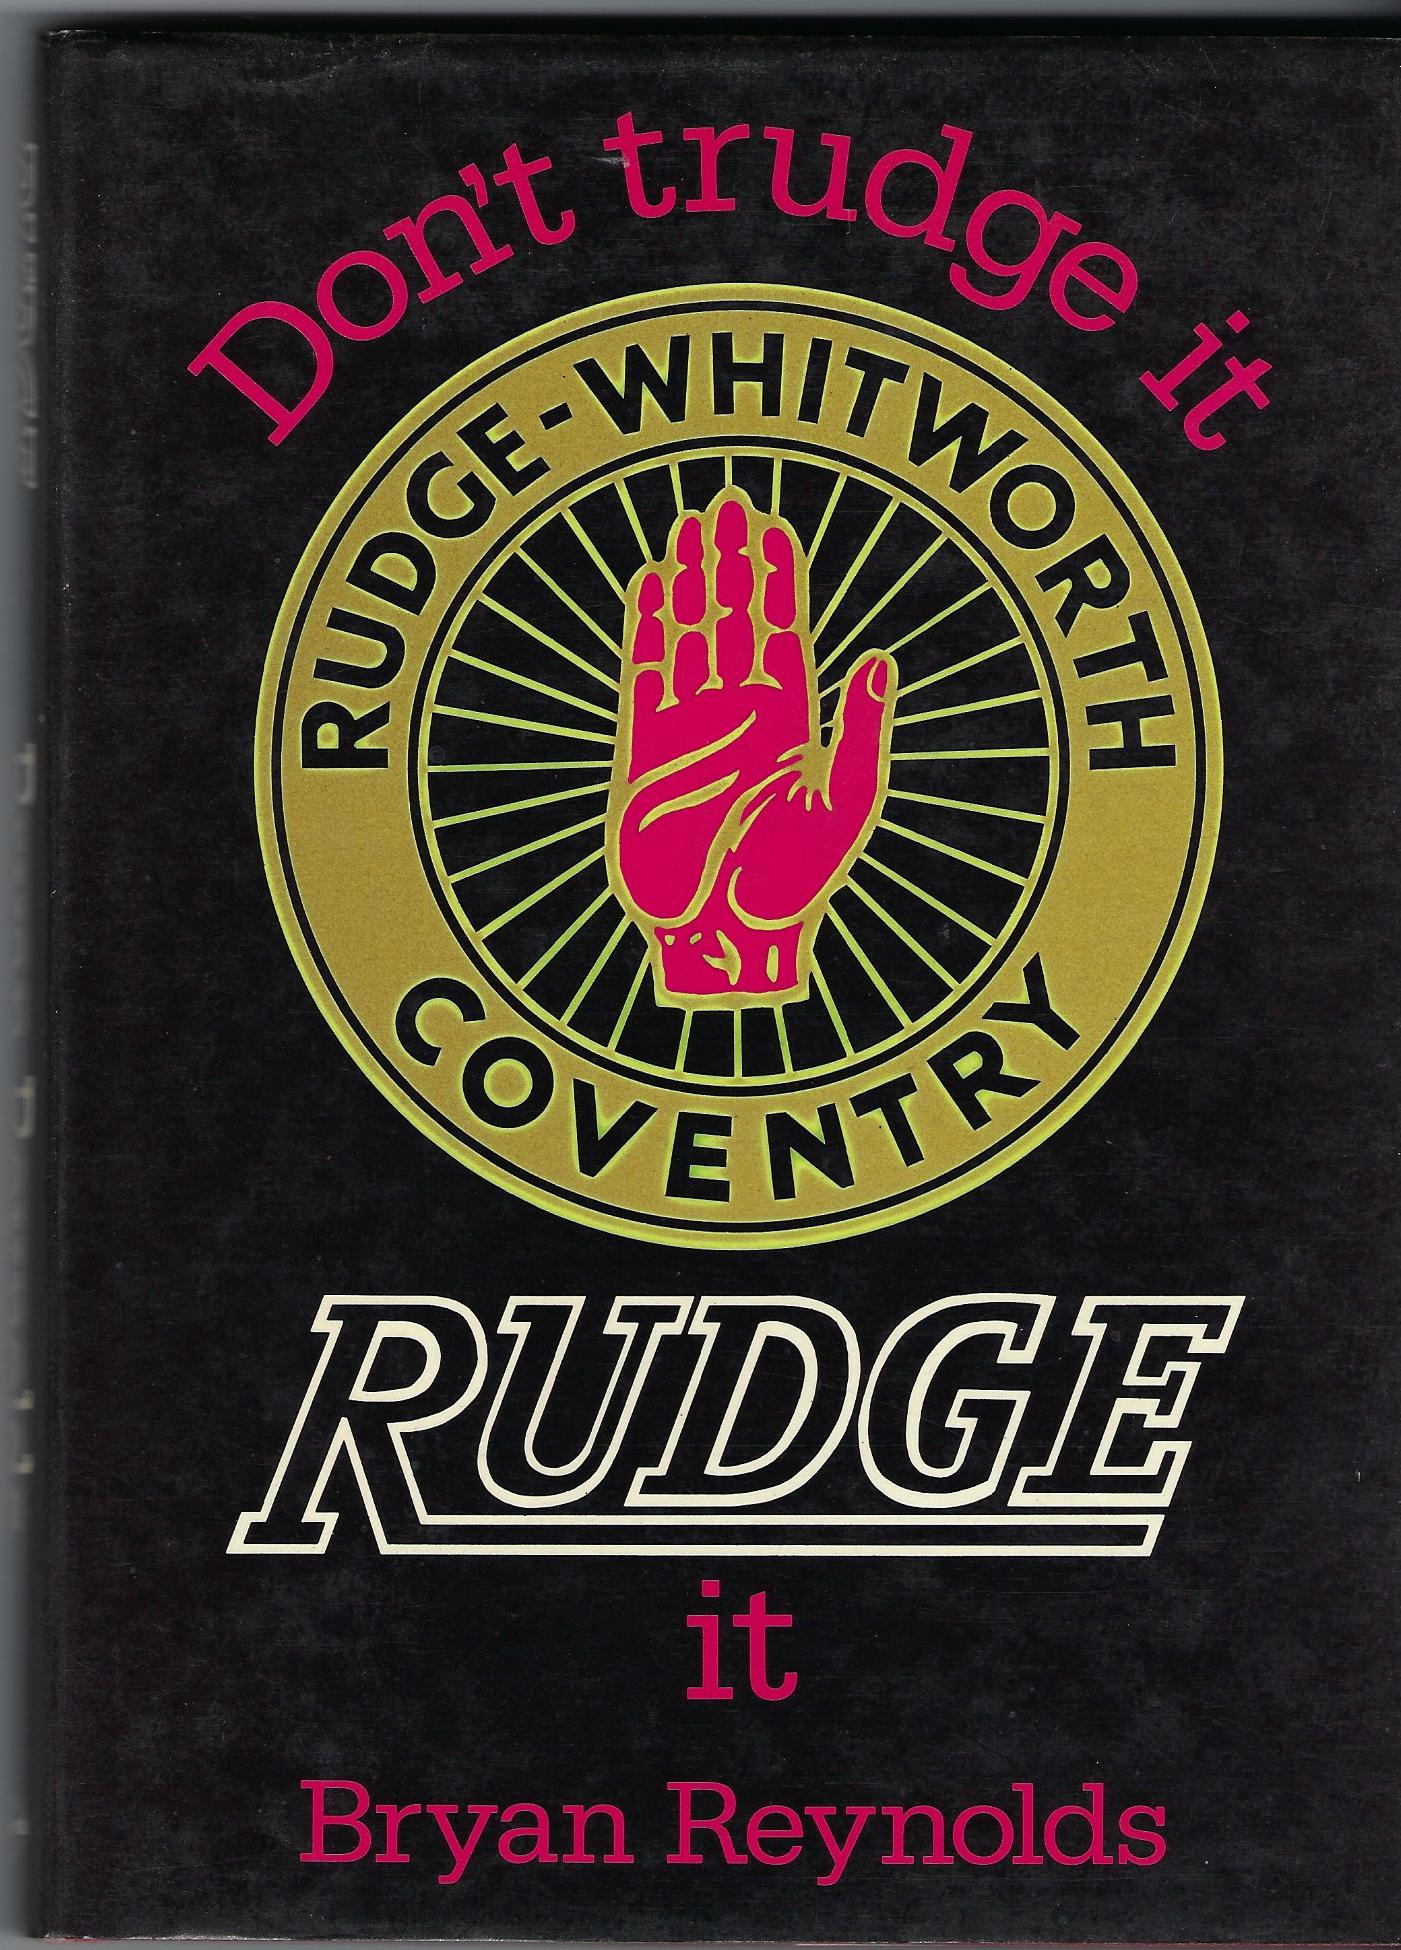 Image for Don't trudge it, Rudge it (A Foulis motorcycling book)